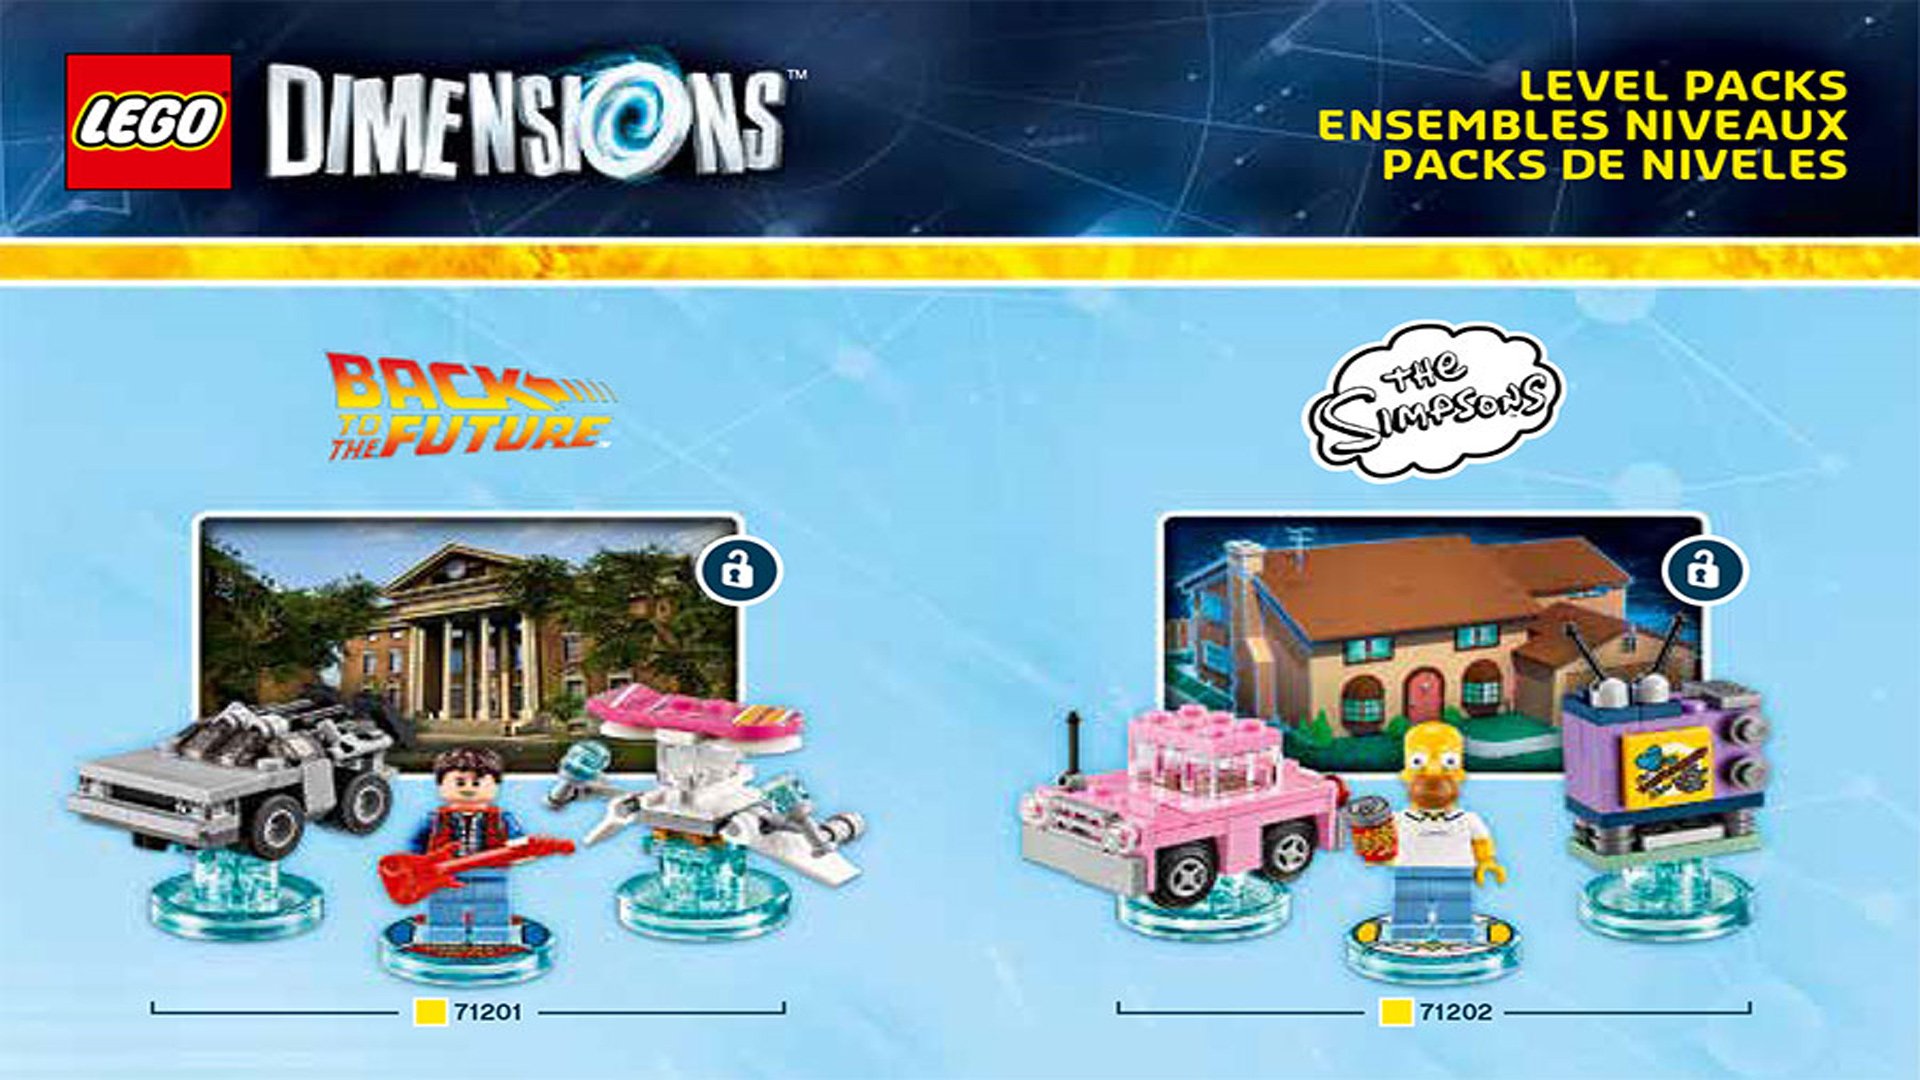 Lego Dimensions Back to the Future and The Simpsons Level Packs